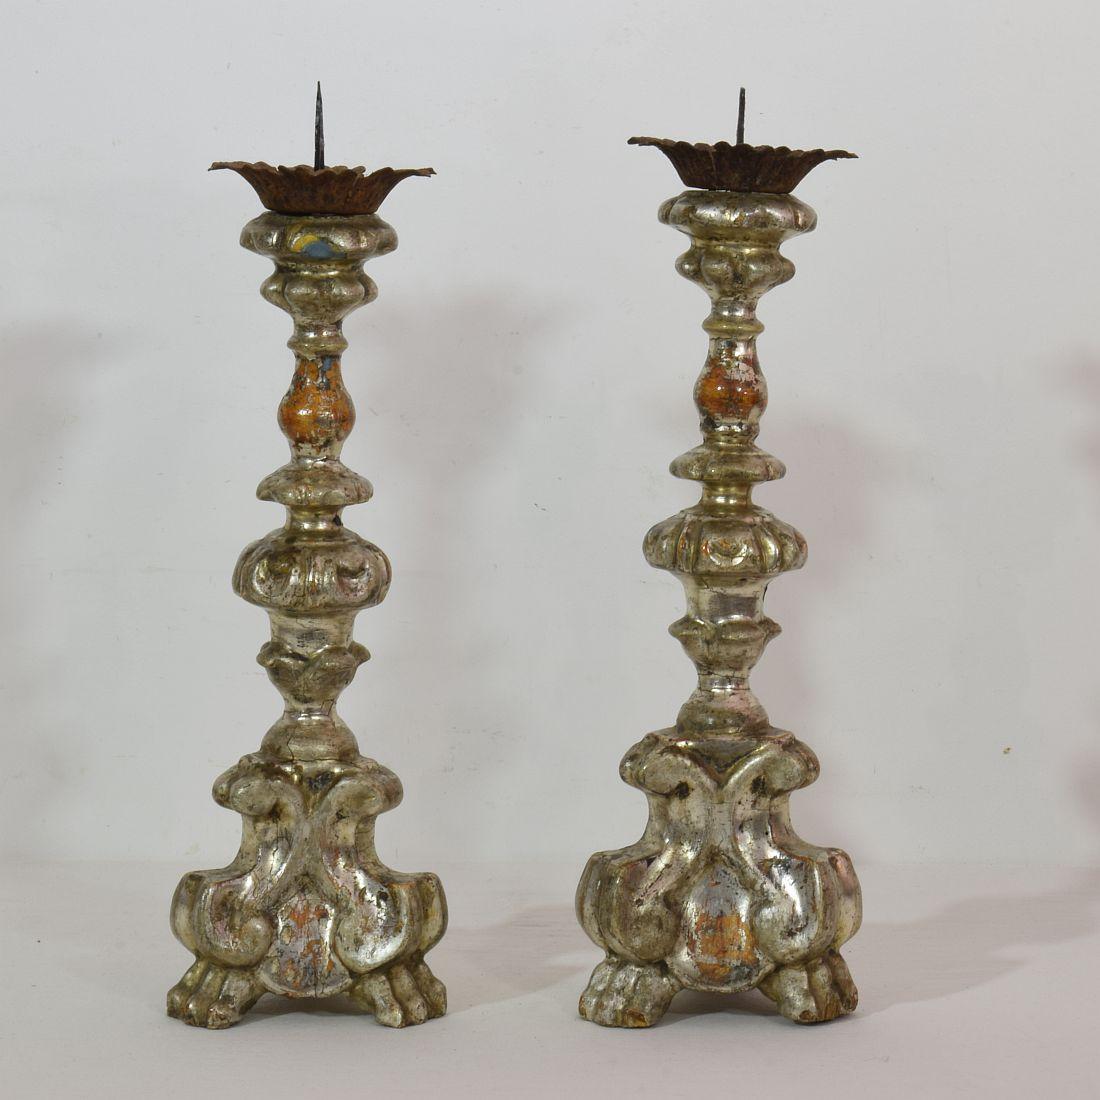 Great pair of wooden candleholders with silver leaf and traces of blue color underneath,
Italy, circa 1750-1800.
Weathered and small losses.